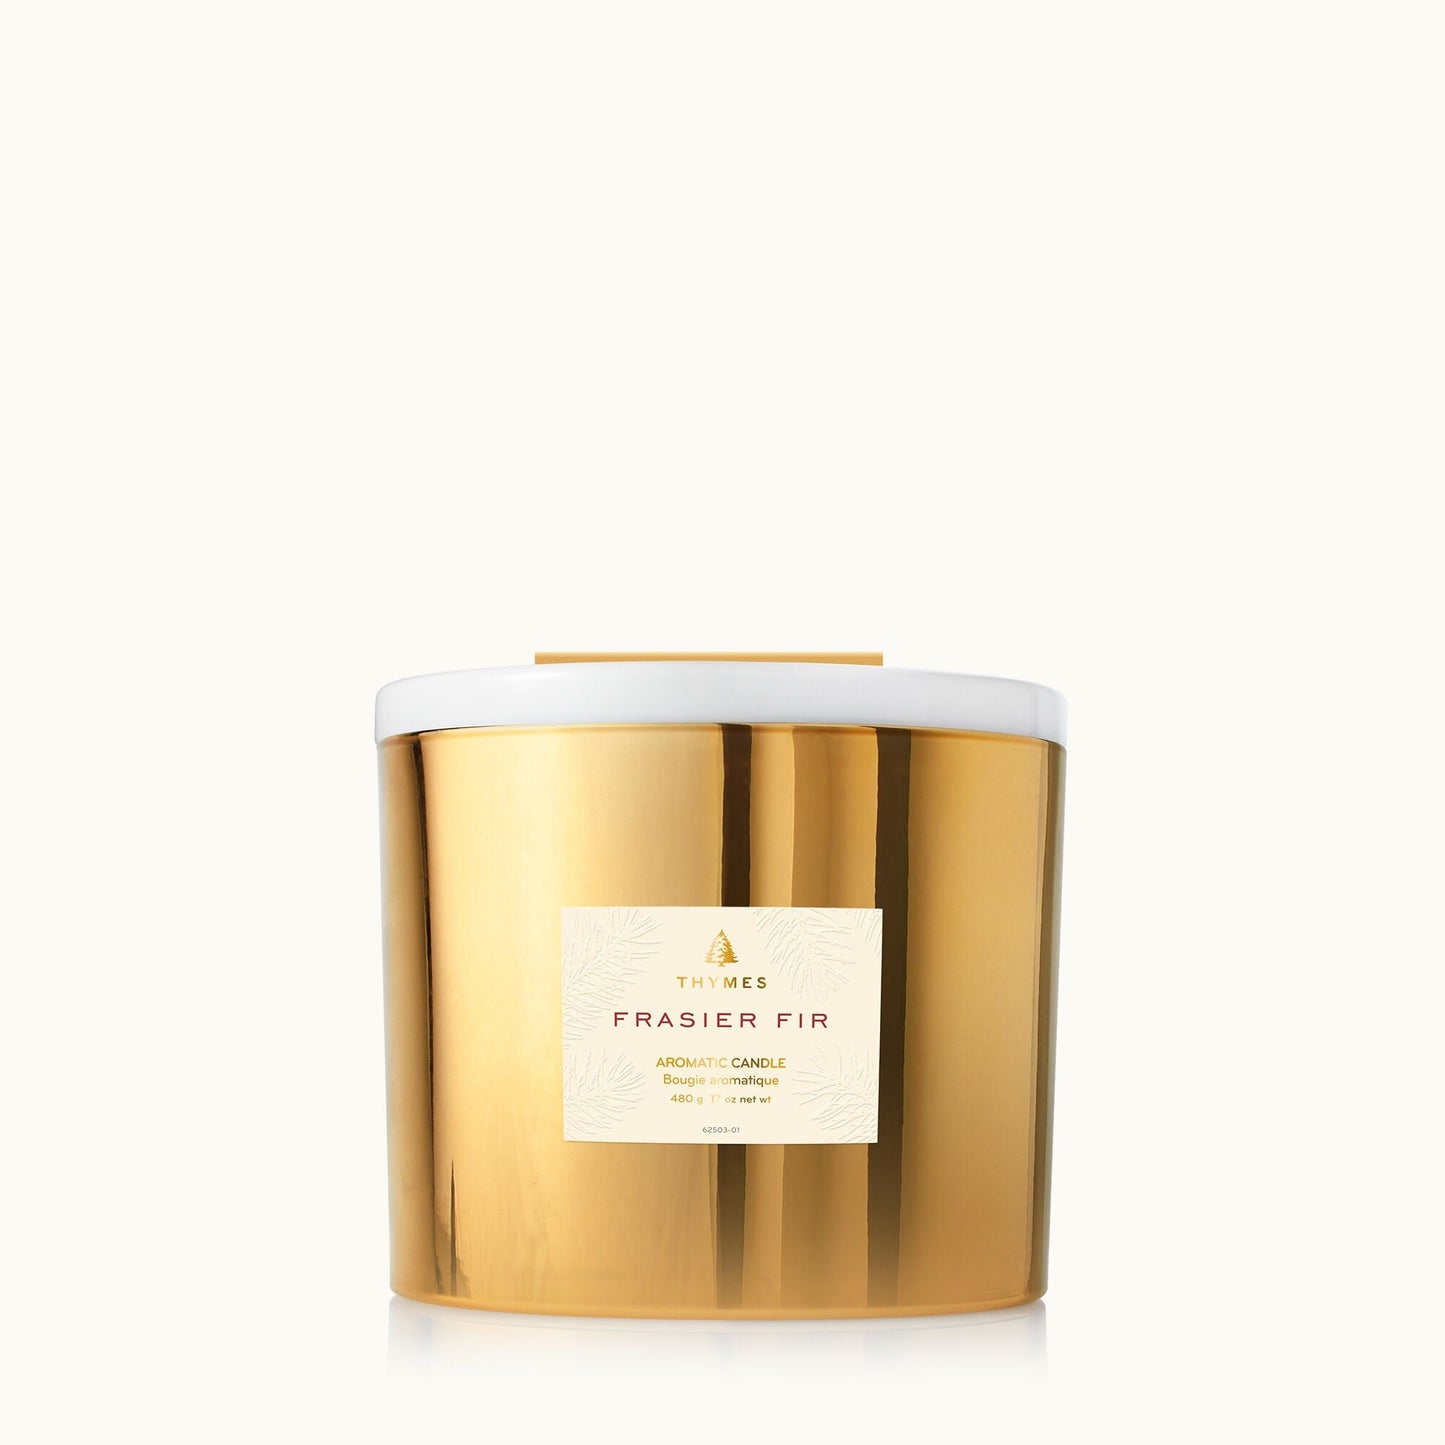 Frasier Fir Poured Candle, 3-Wick Gold - Gaines Jewelers